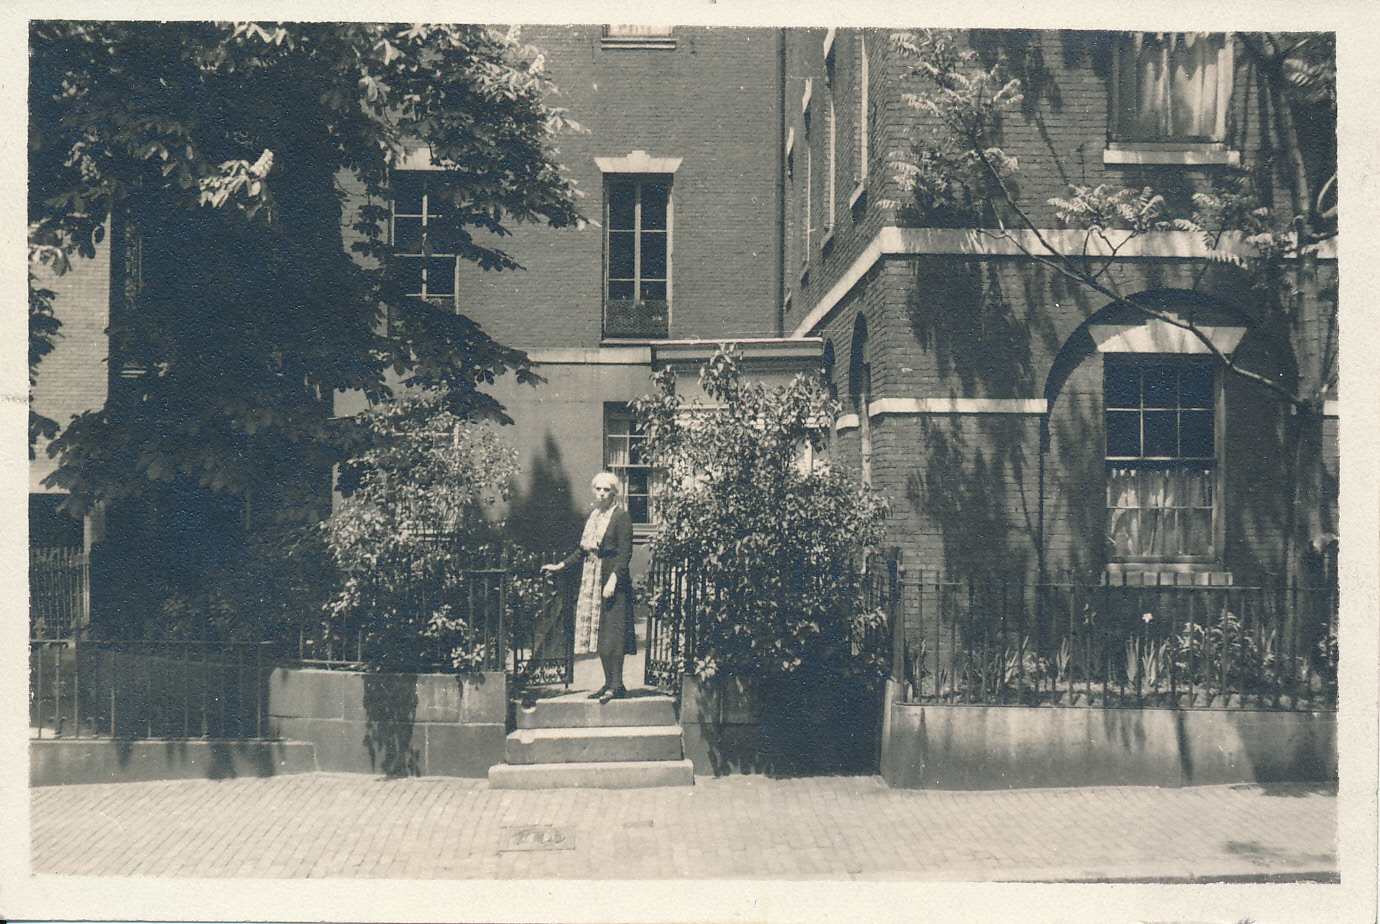 Beacon Hill History – Buildings of New England